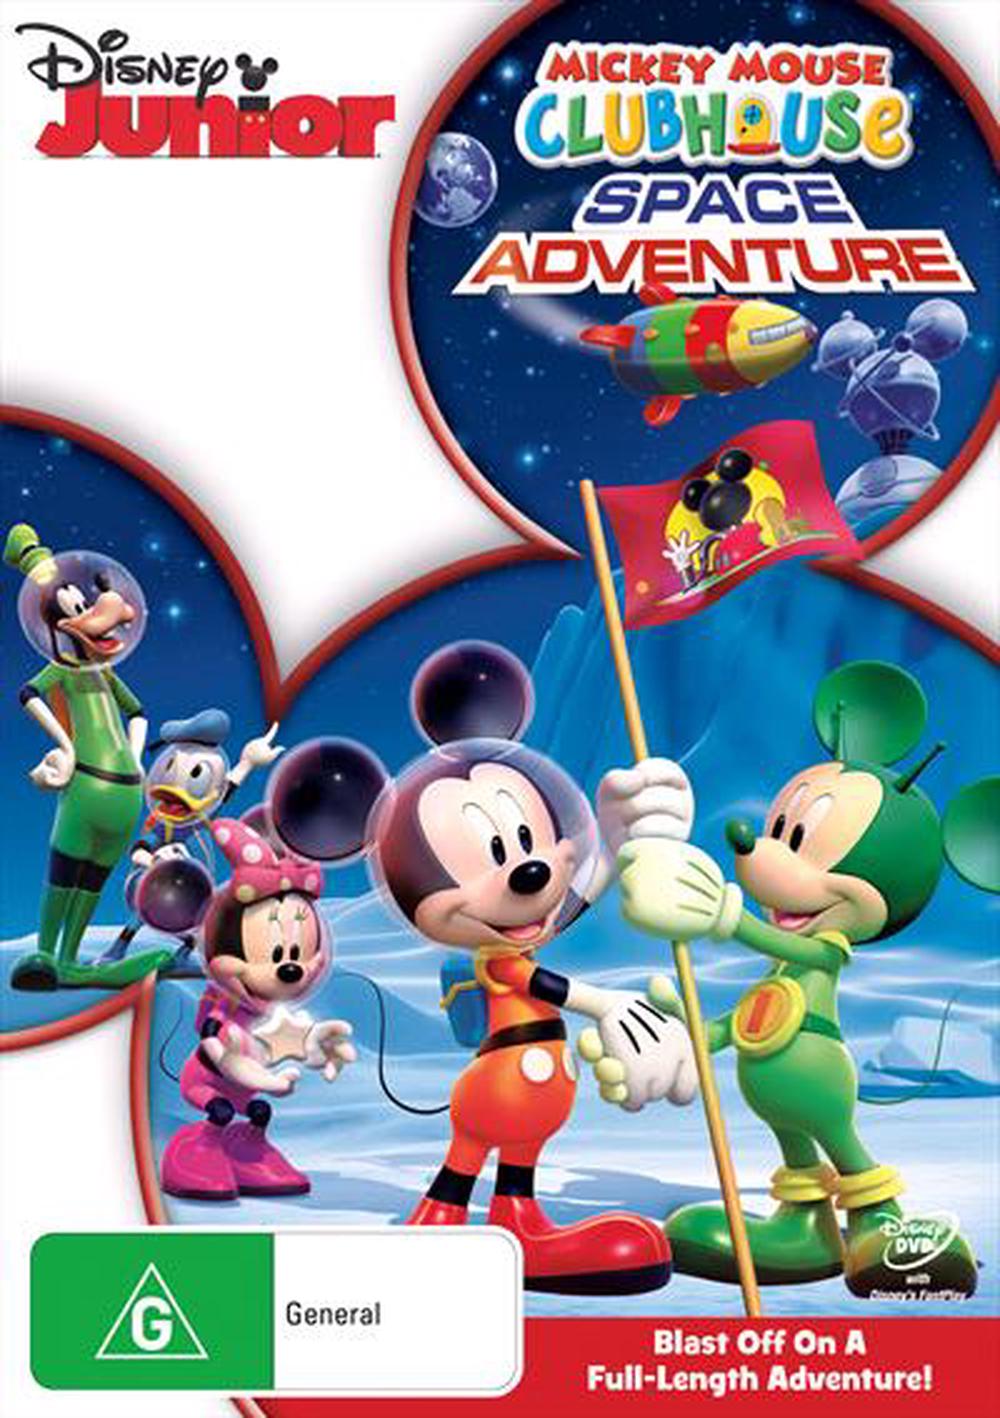  Mickey Mouse Clubhouse Space Adventure  DVD Buy online 